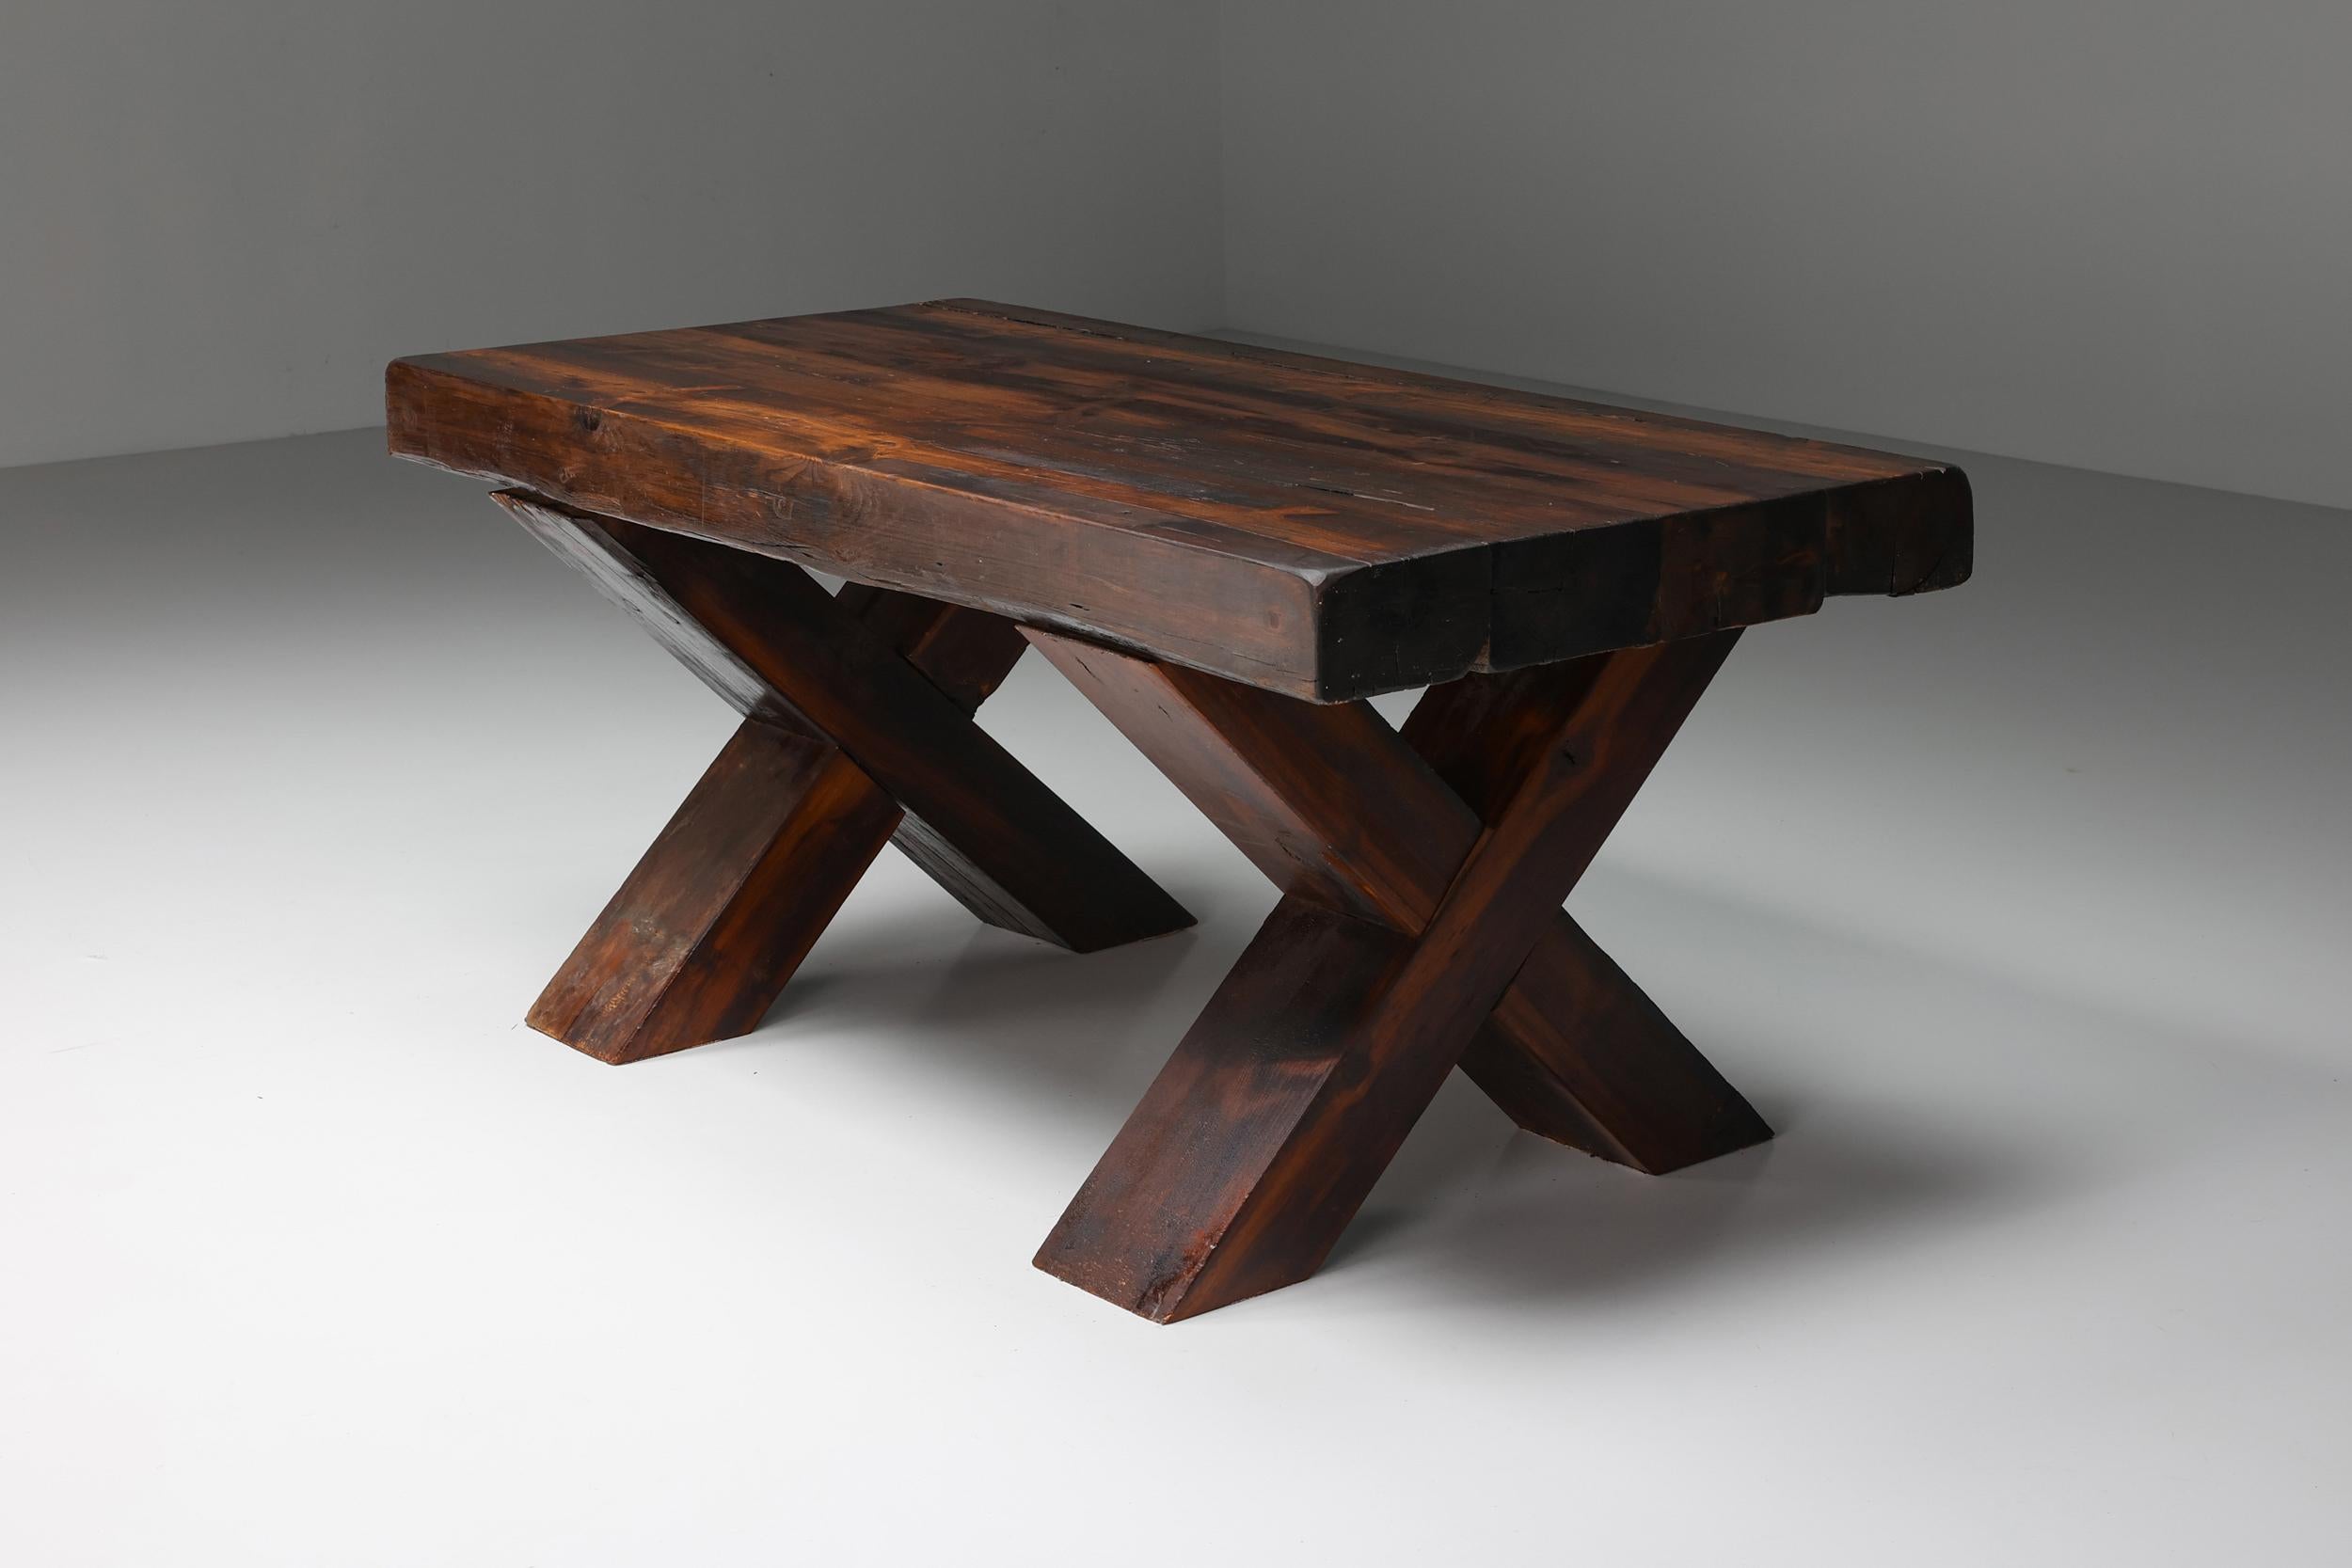 Mid-Century Modern; Italy; Rustic; Brutalist dark wooden dining table with X-legs, Italy, the 1940s; 

Rustic dark wooden dining table with X-shaped legs made in Italy in the 1940s. Seats six people comfortably. The table has a charismatic patina